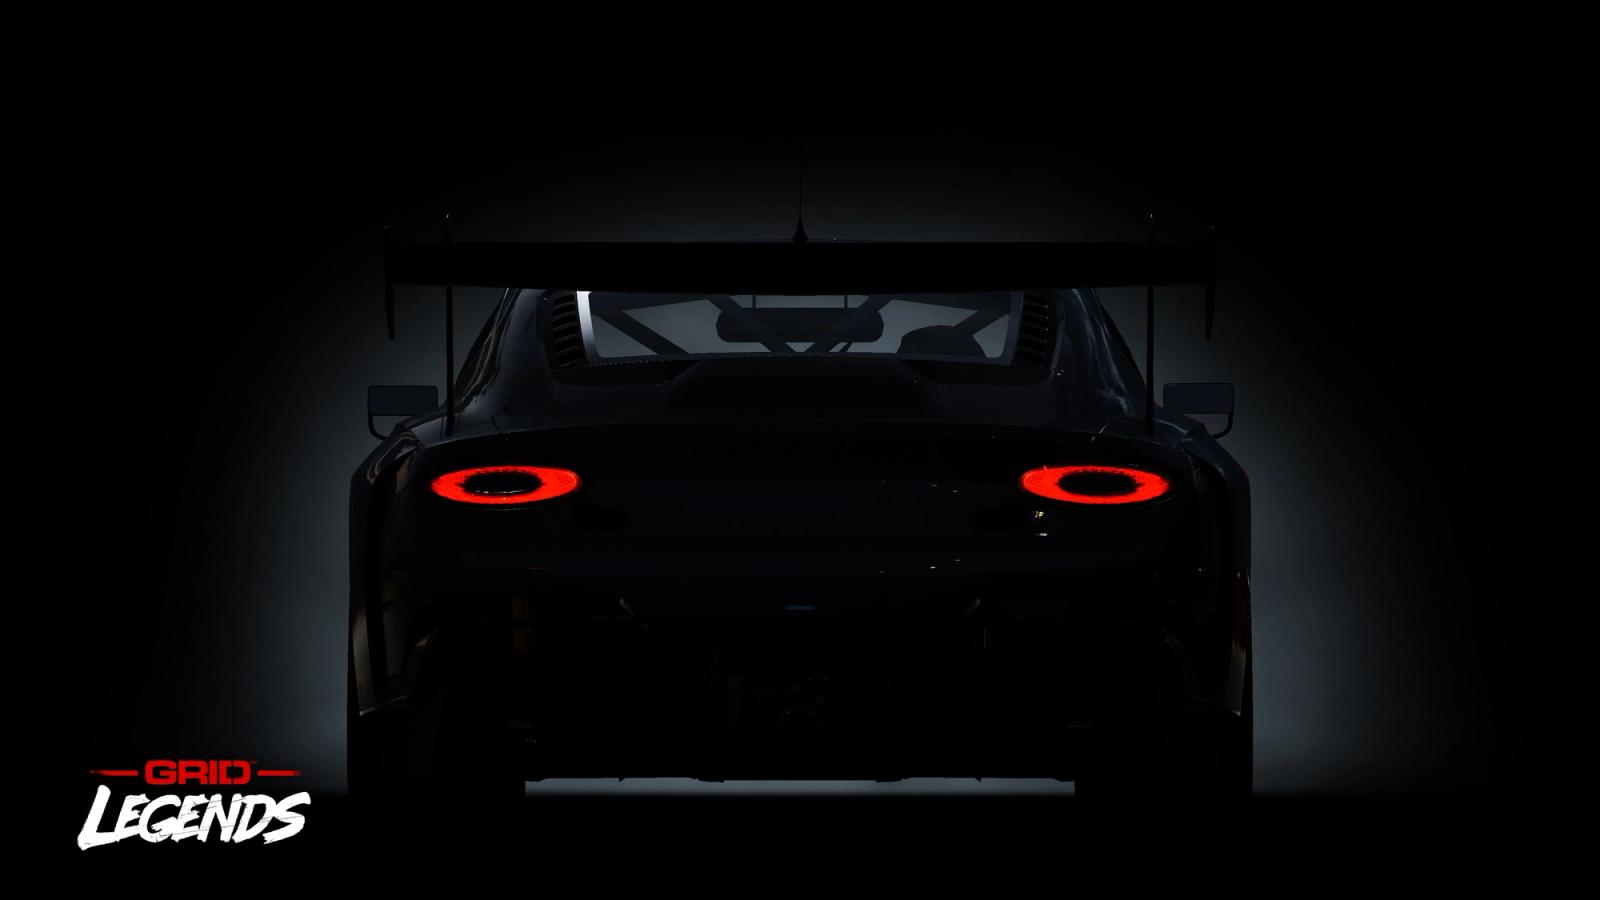 Four new cars teased for GRID Legends